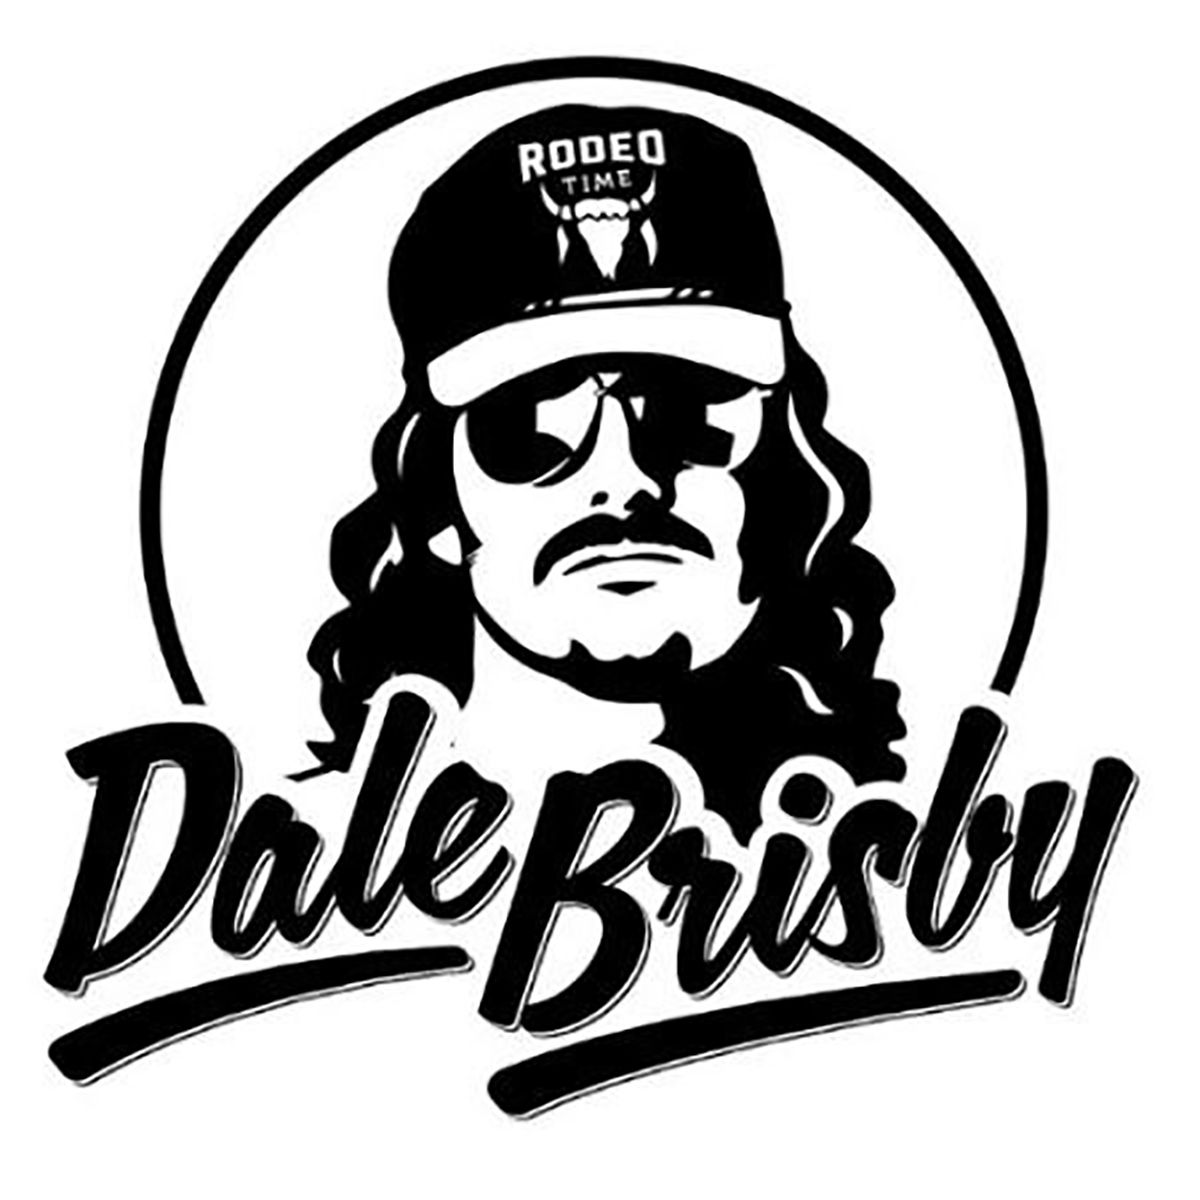 Dale Brisby Decal x 4. Dale brisby, Rodeo time, Truck stickers